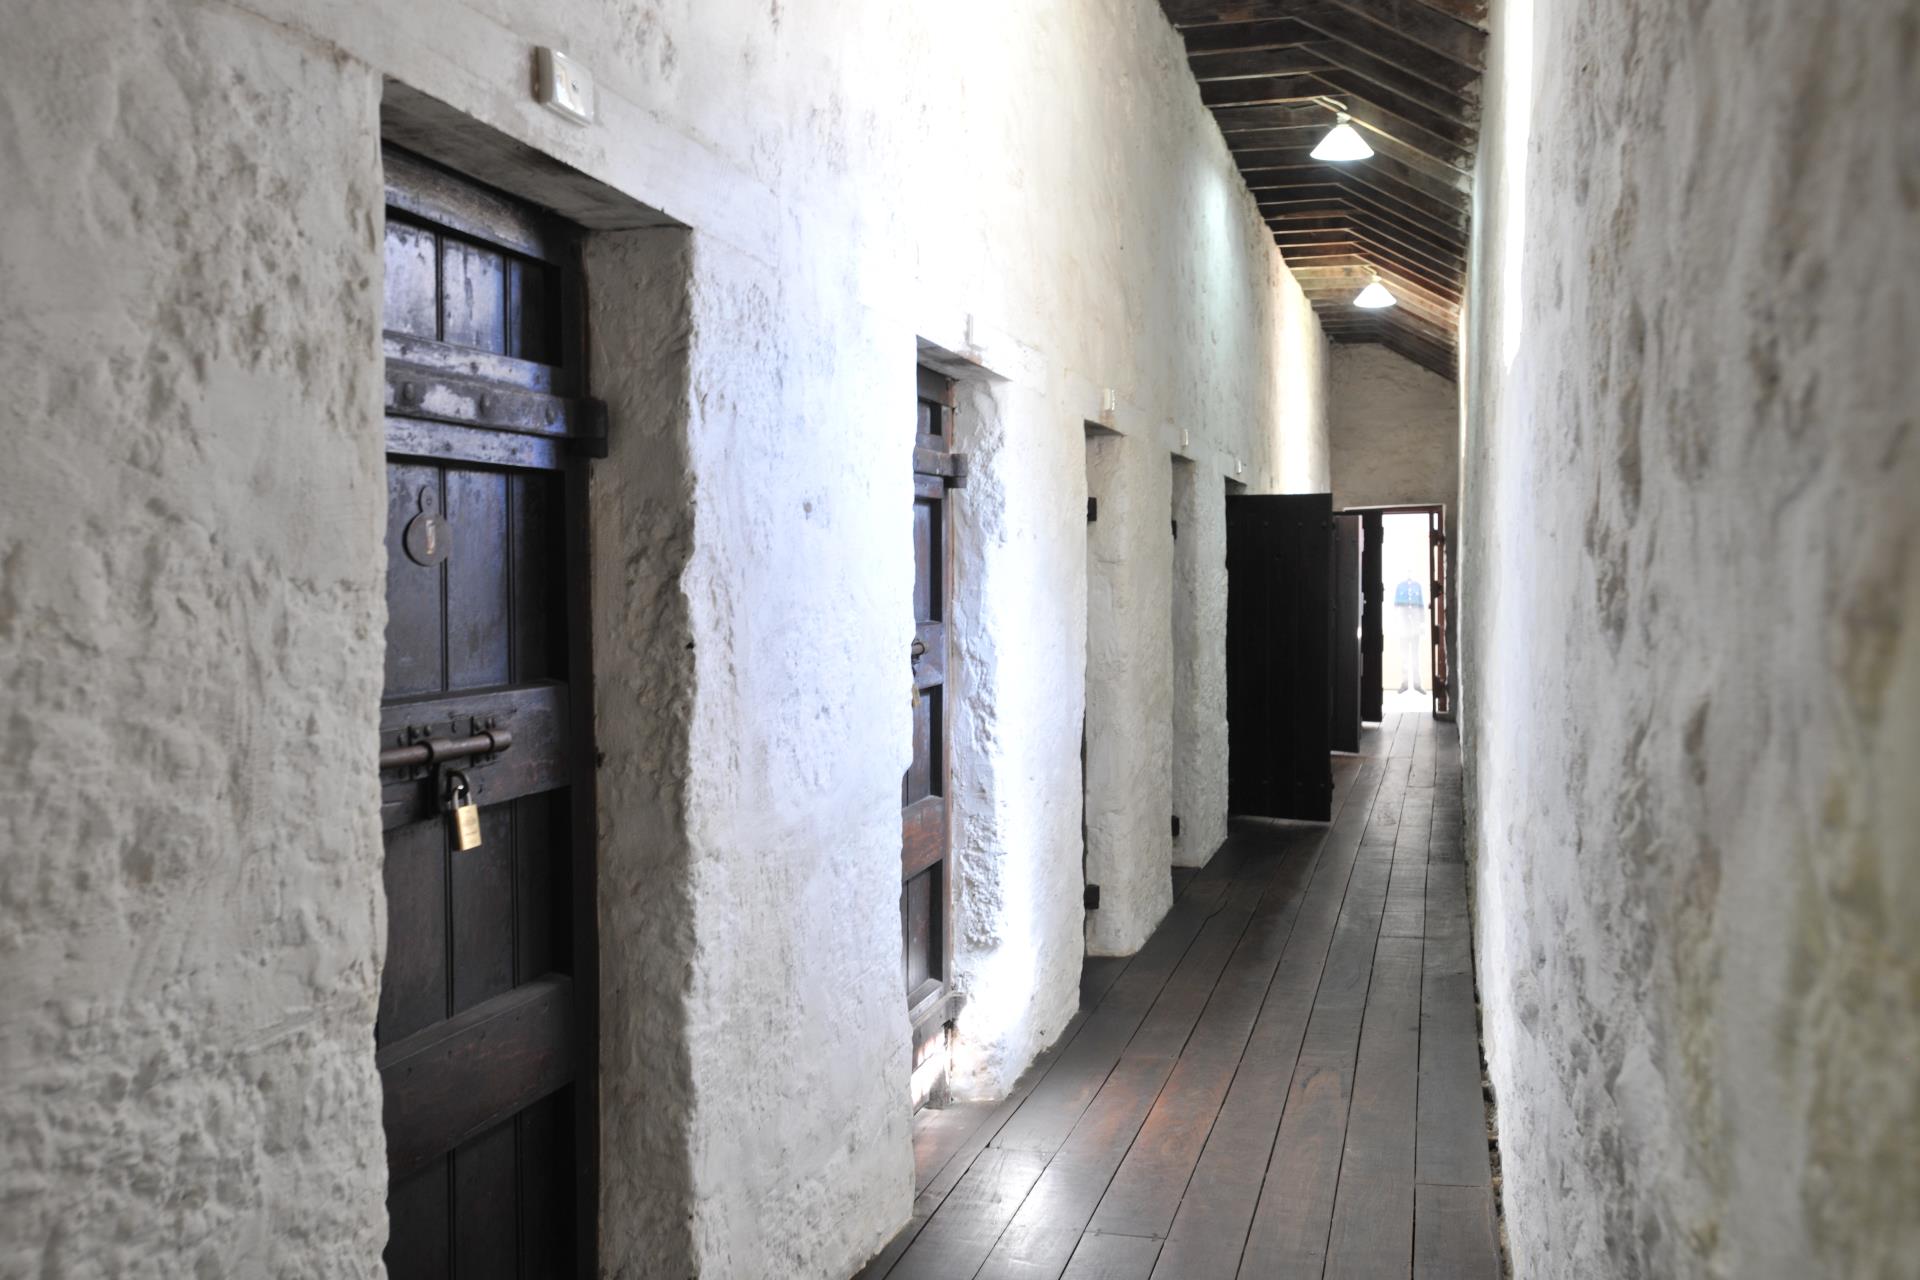 Looking for Old Busselton Gaol Cell Stories